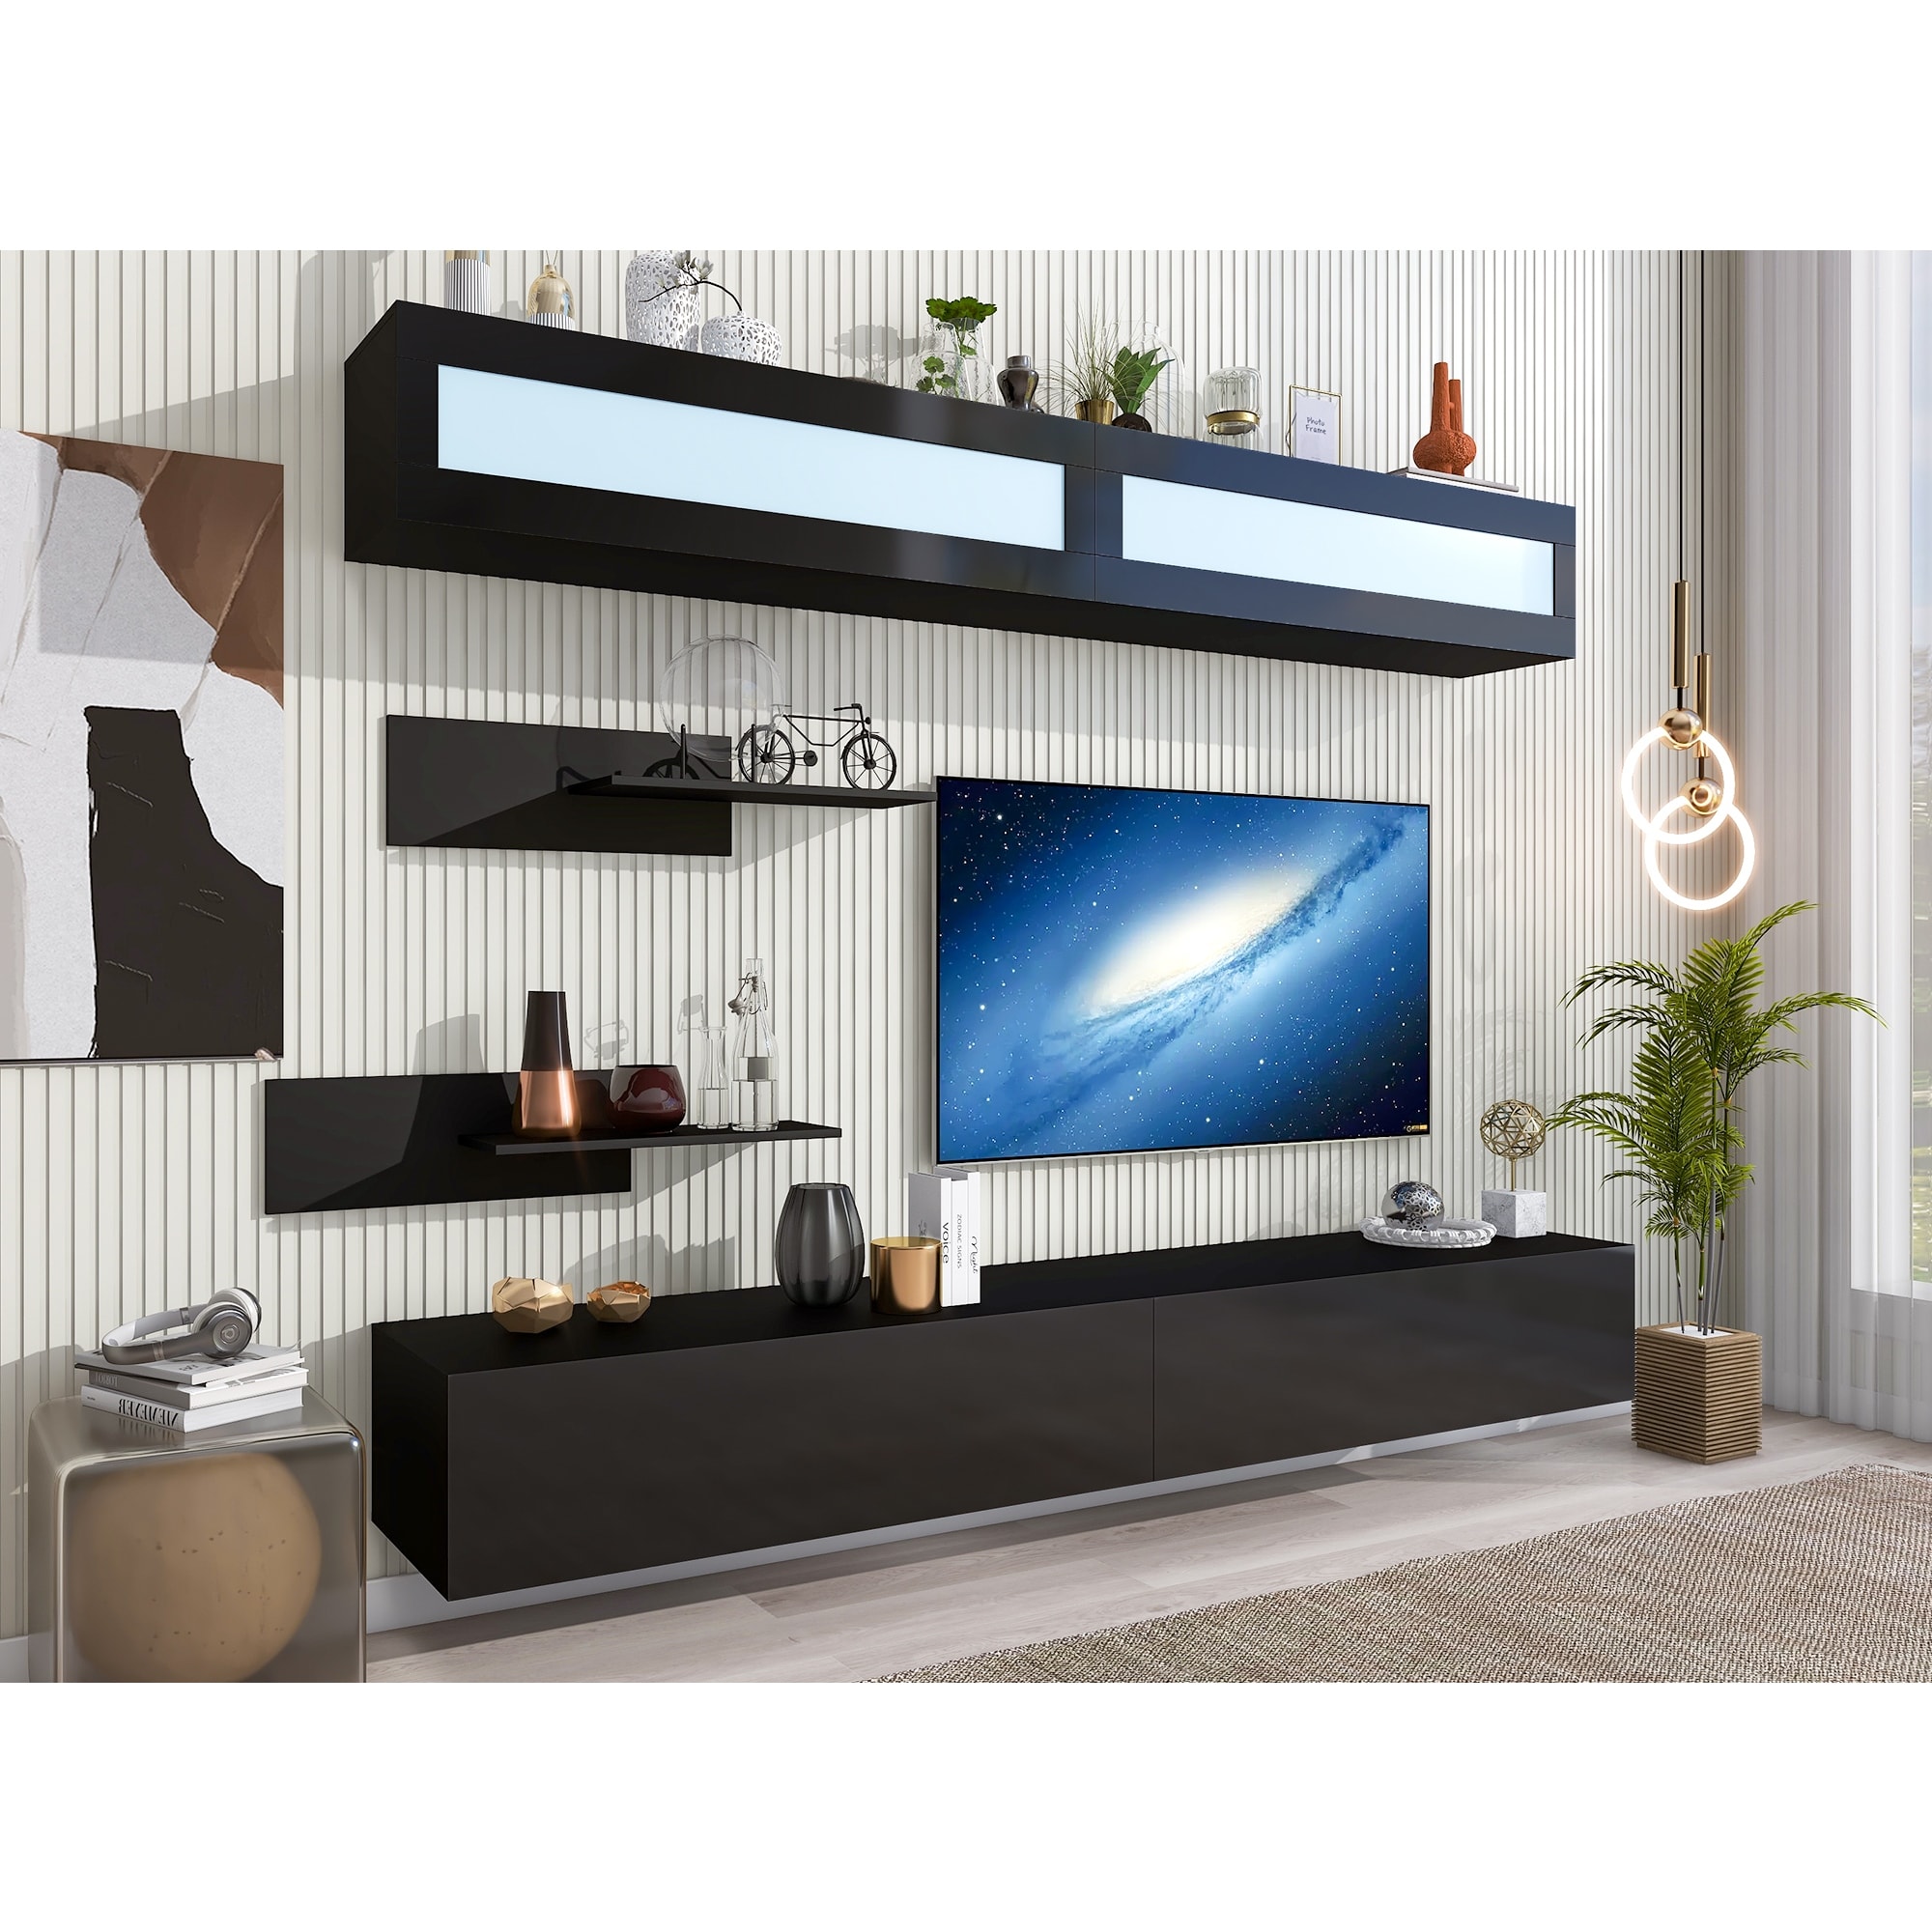 Modern Wall Mounted Floating Entertainment Center With Storage Cabinets